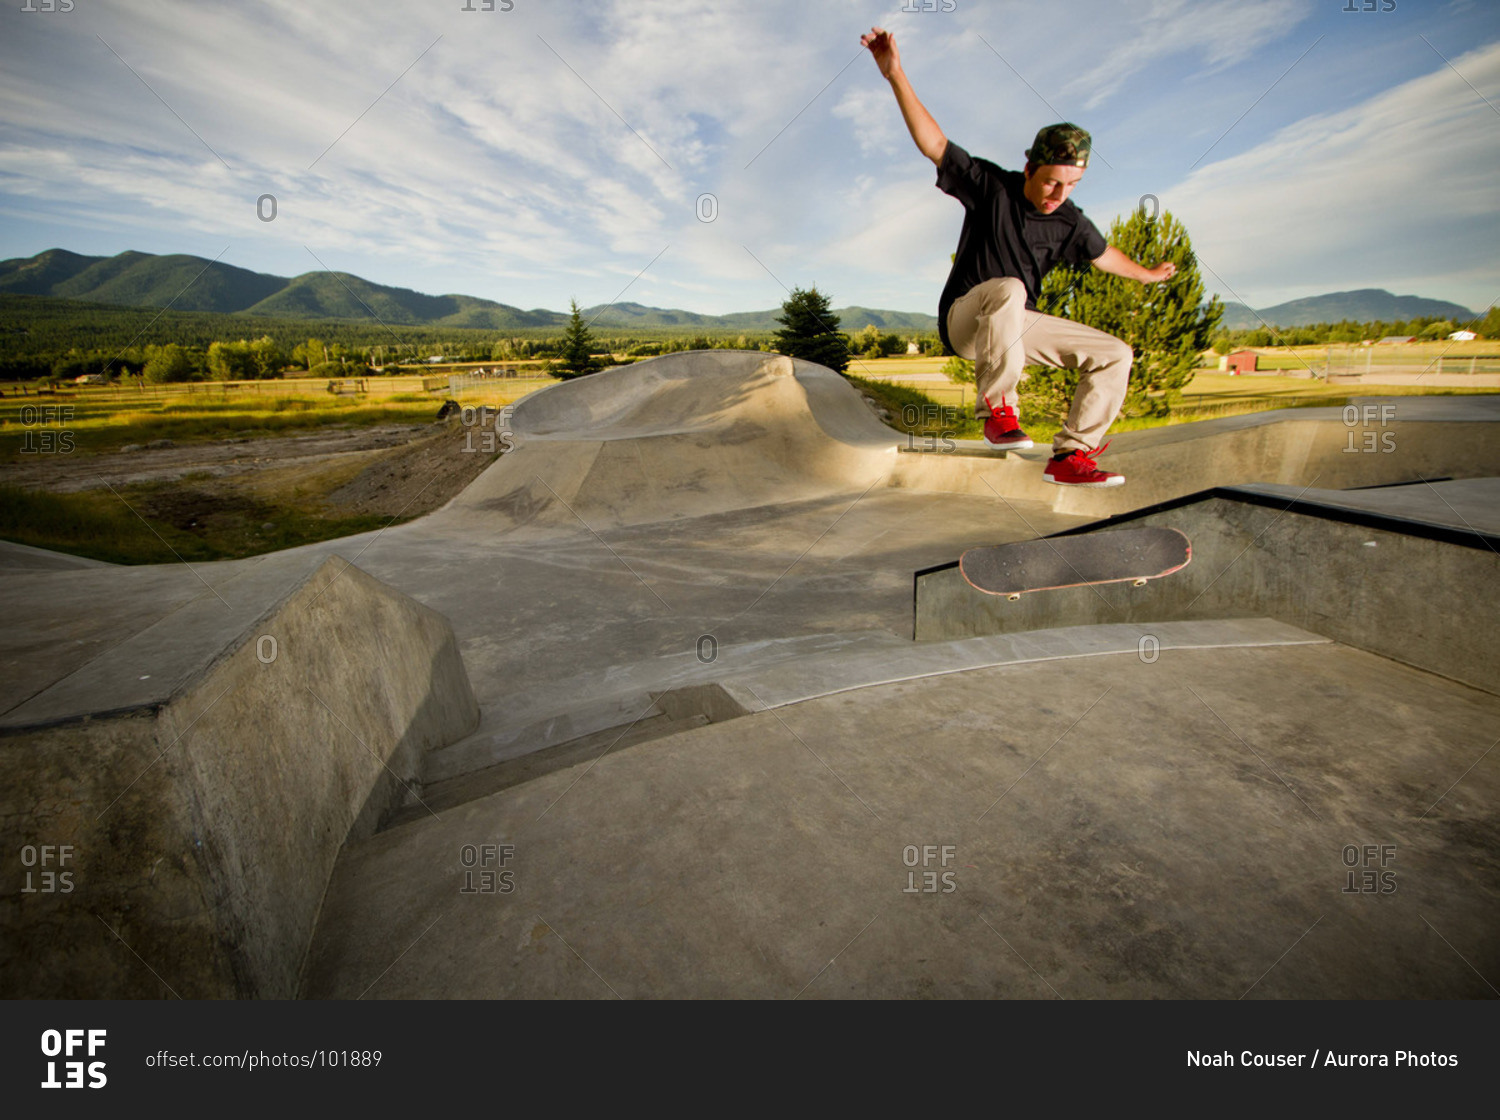 A skater flips his skateboard up a ramp at the skatepark in Whitefish, Montana on a cloudy summer day.